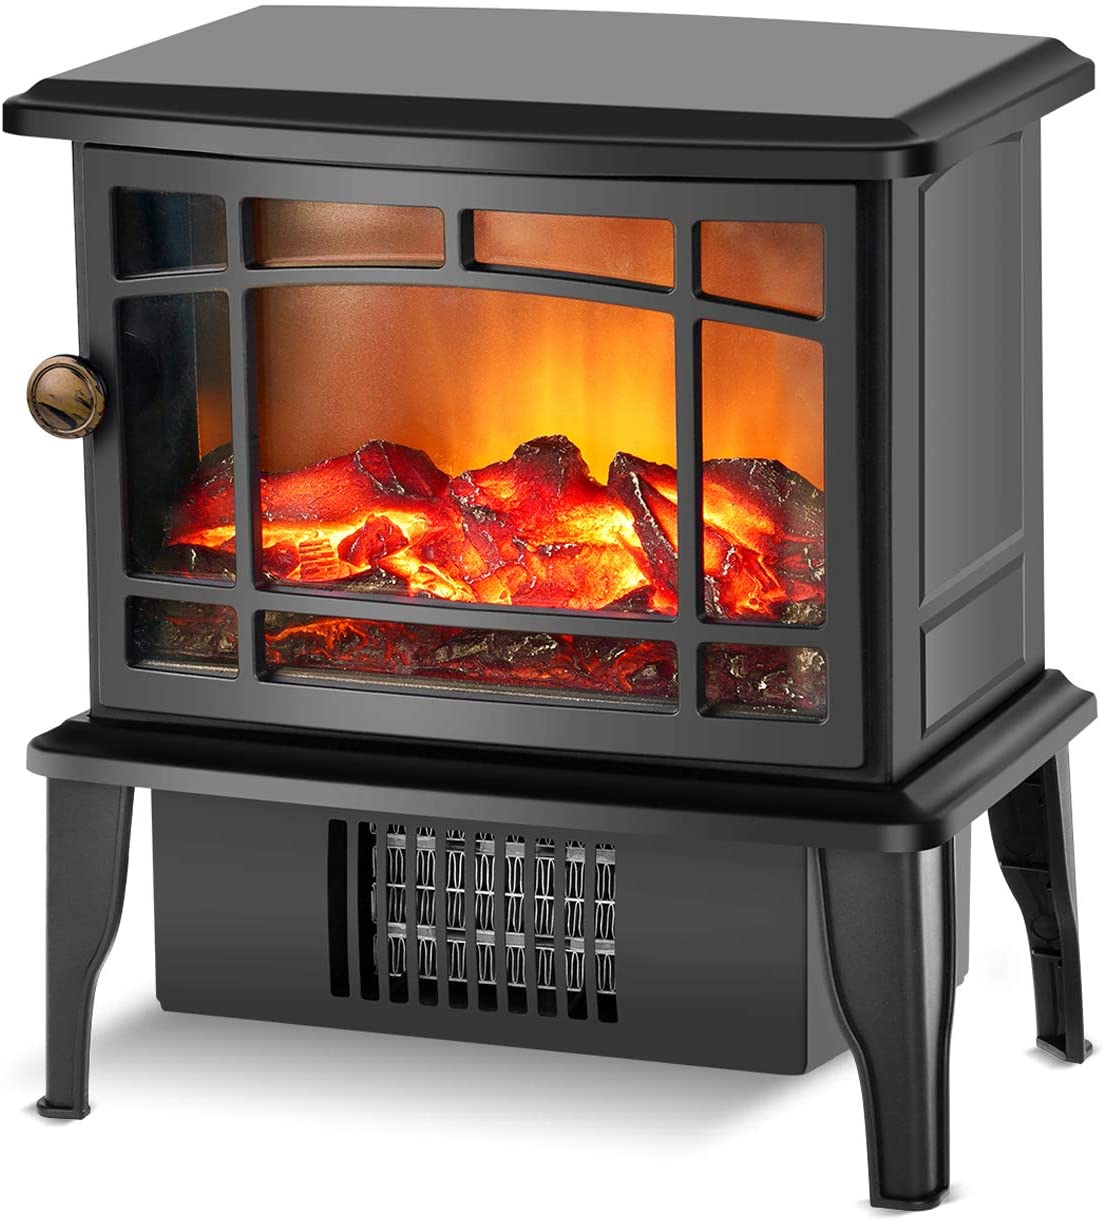 Fake Fireplaces Sale Elegant Fireplace Heater Electric Fireplace Stove W Fast Heating System 500w Portable Space Heater for Room with Realistic 3d Fake Fireplace Flame